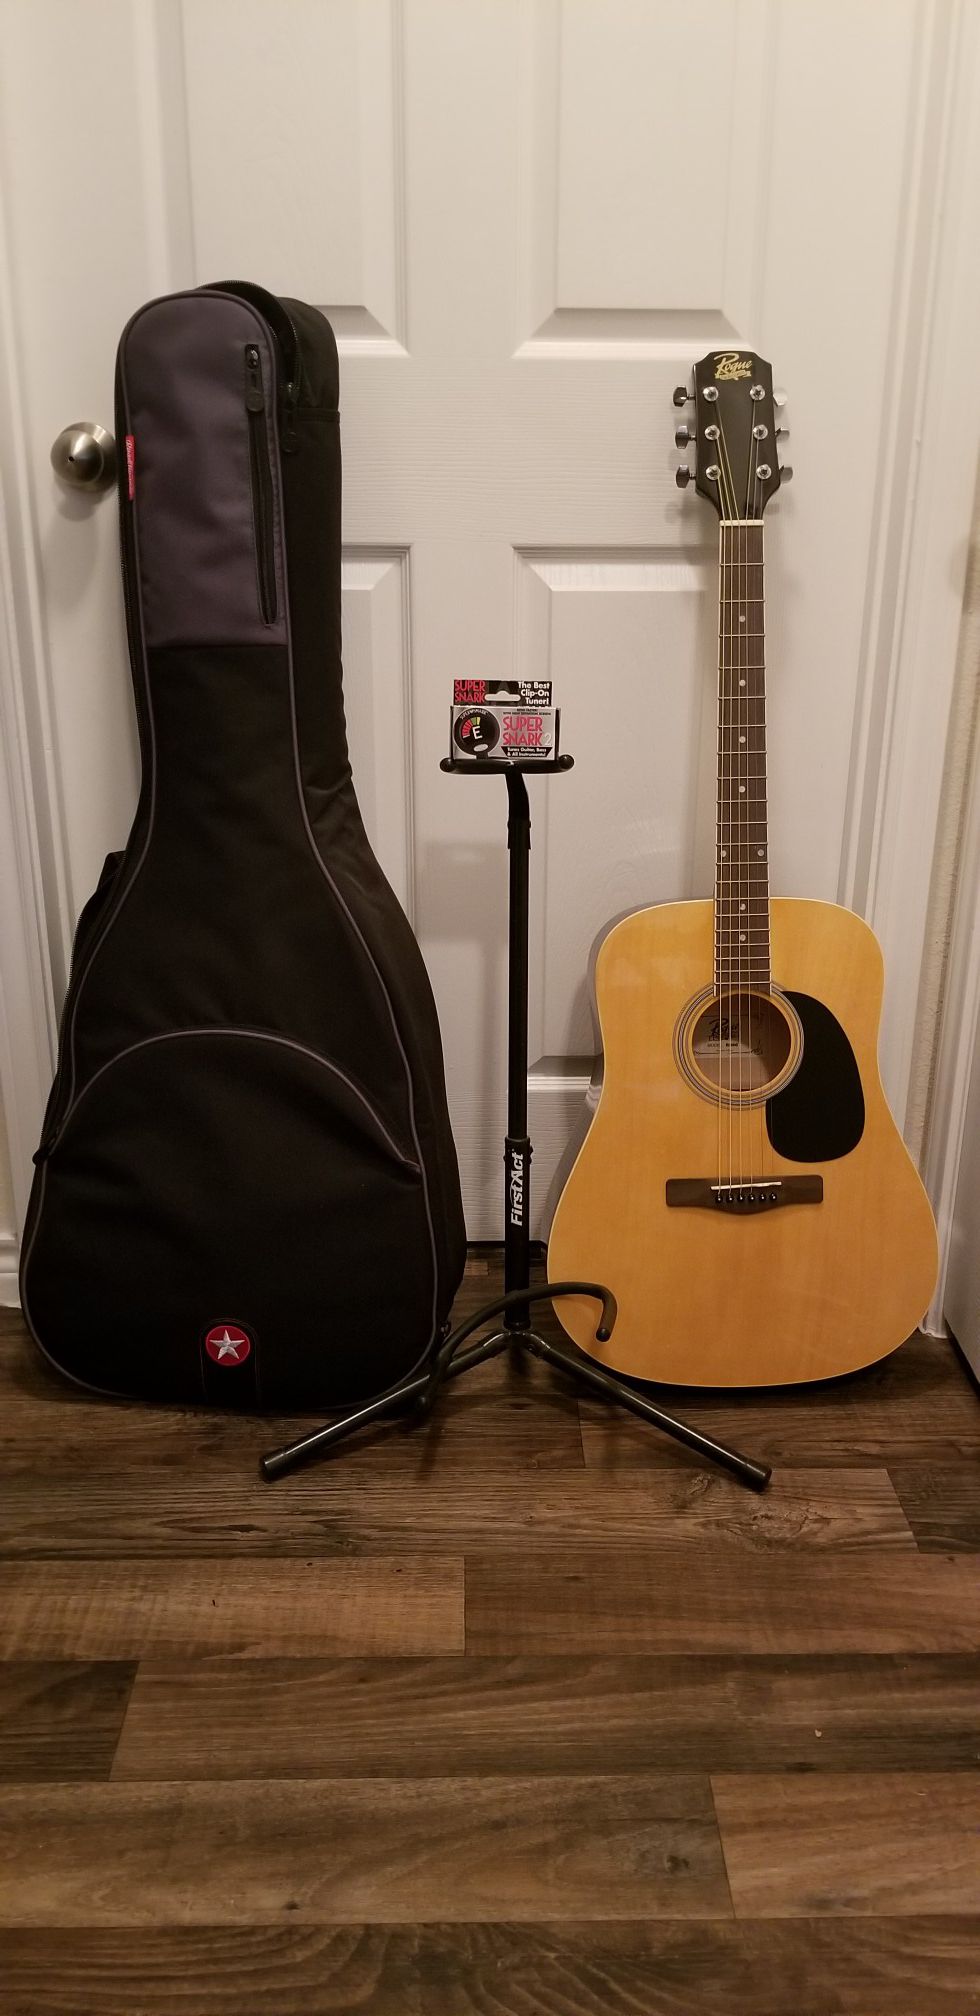 Acustic Guitar Rogue, Swing Wall Guitar Holder, Clip on Tuner, Gig Bag and Guitar Stand